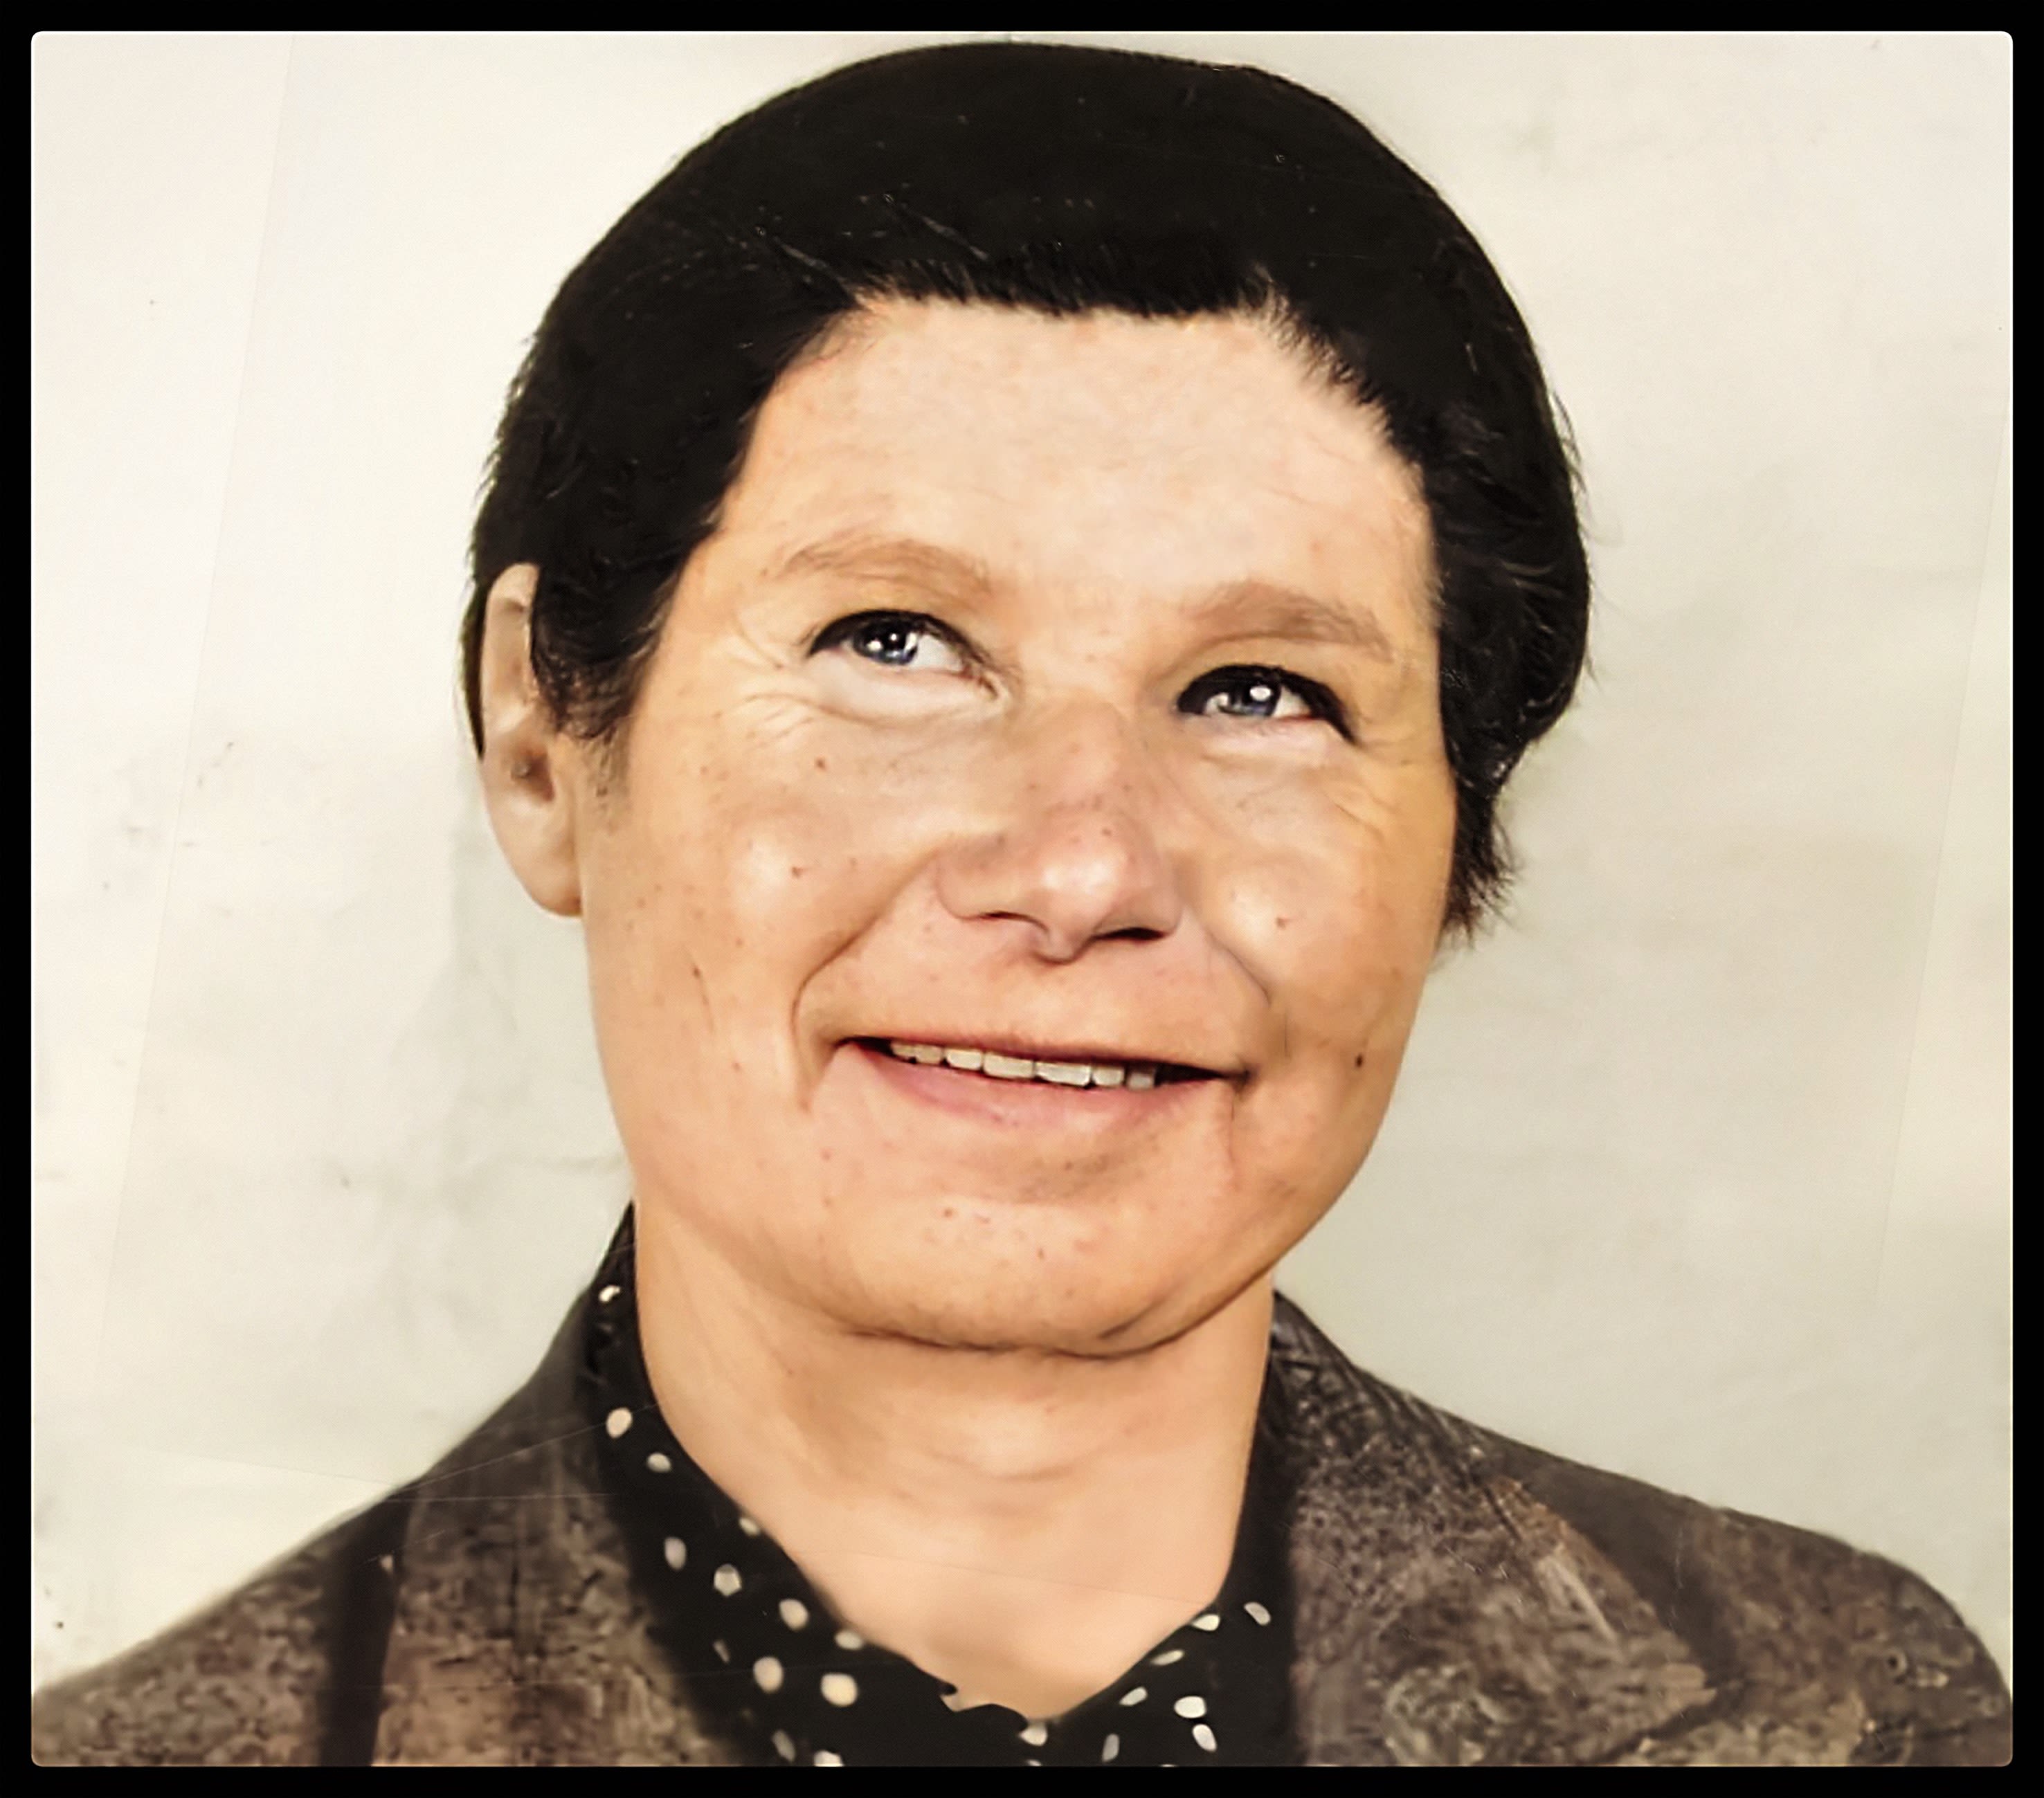 An image of Constance Tipper smiling. Originally a black and white photo, the artist has used computer technology to make this a colour photograph.